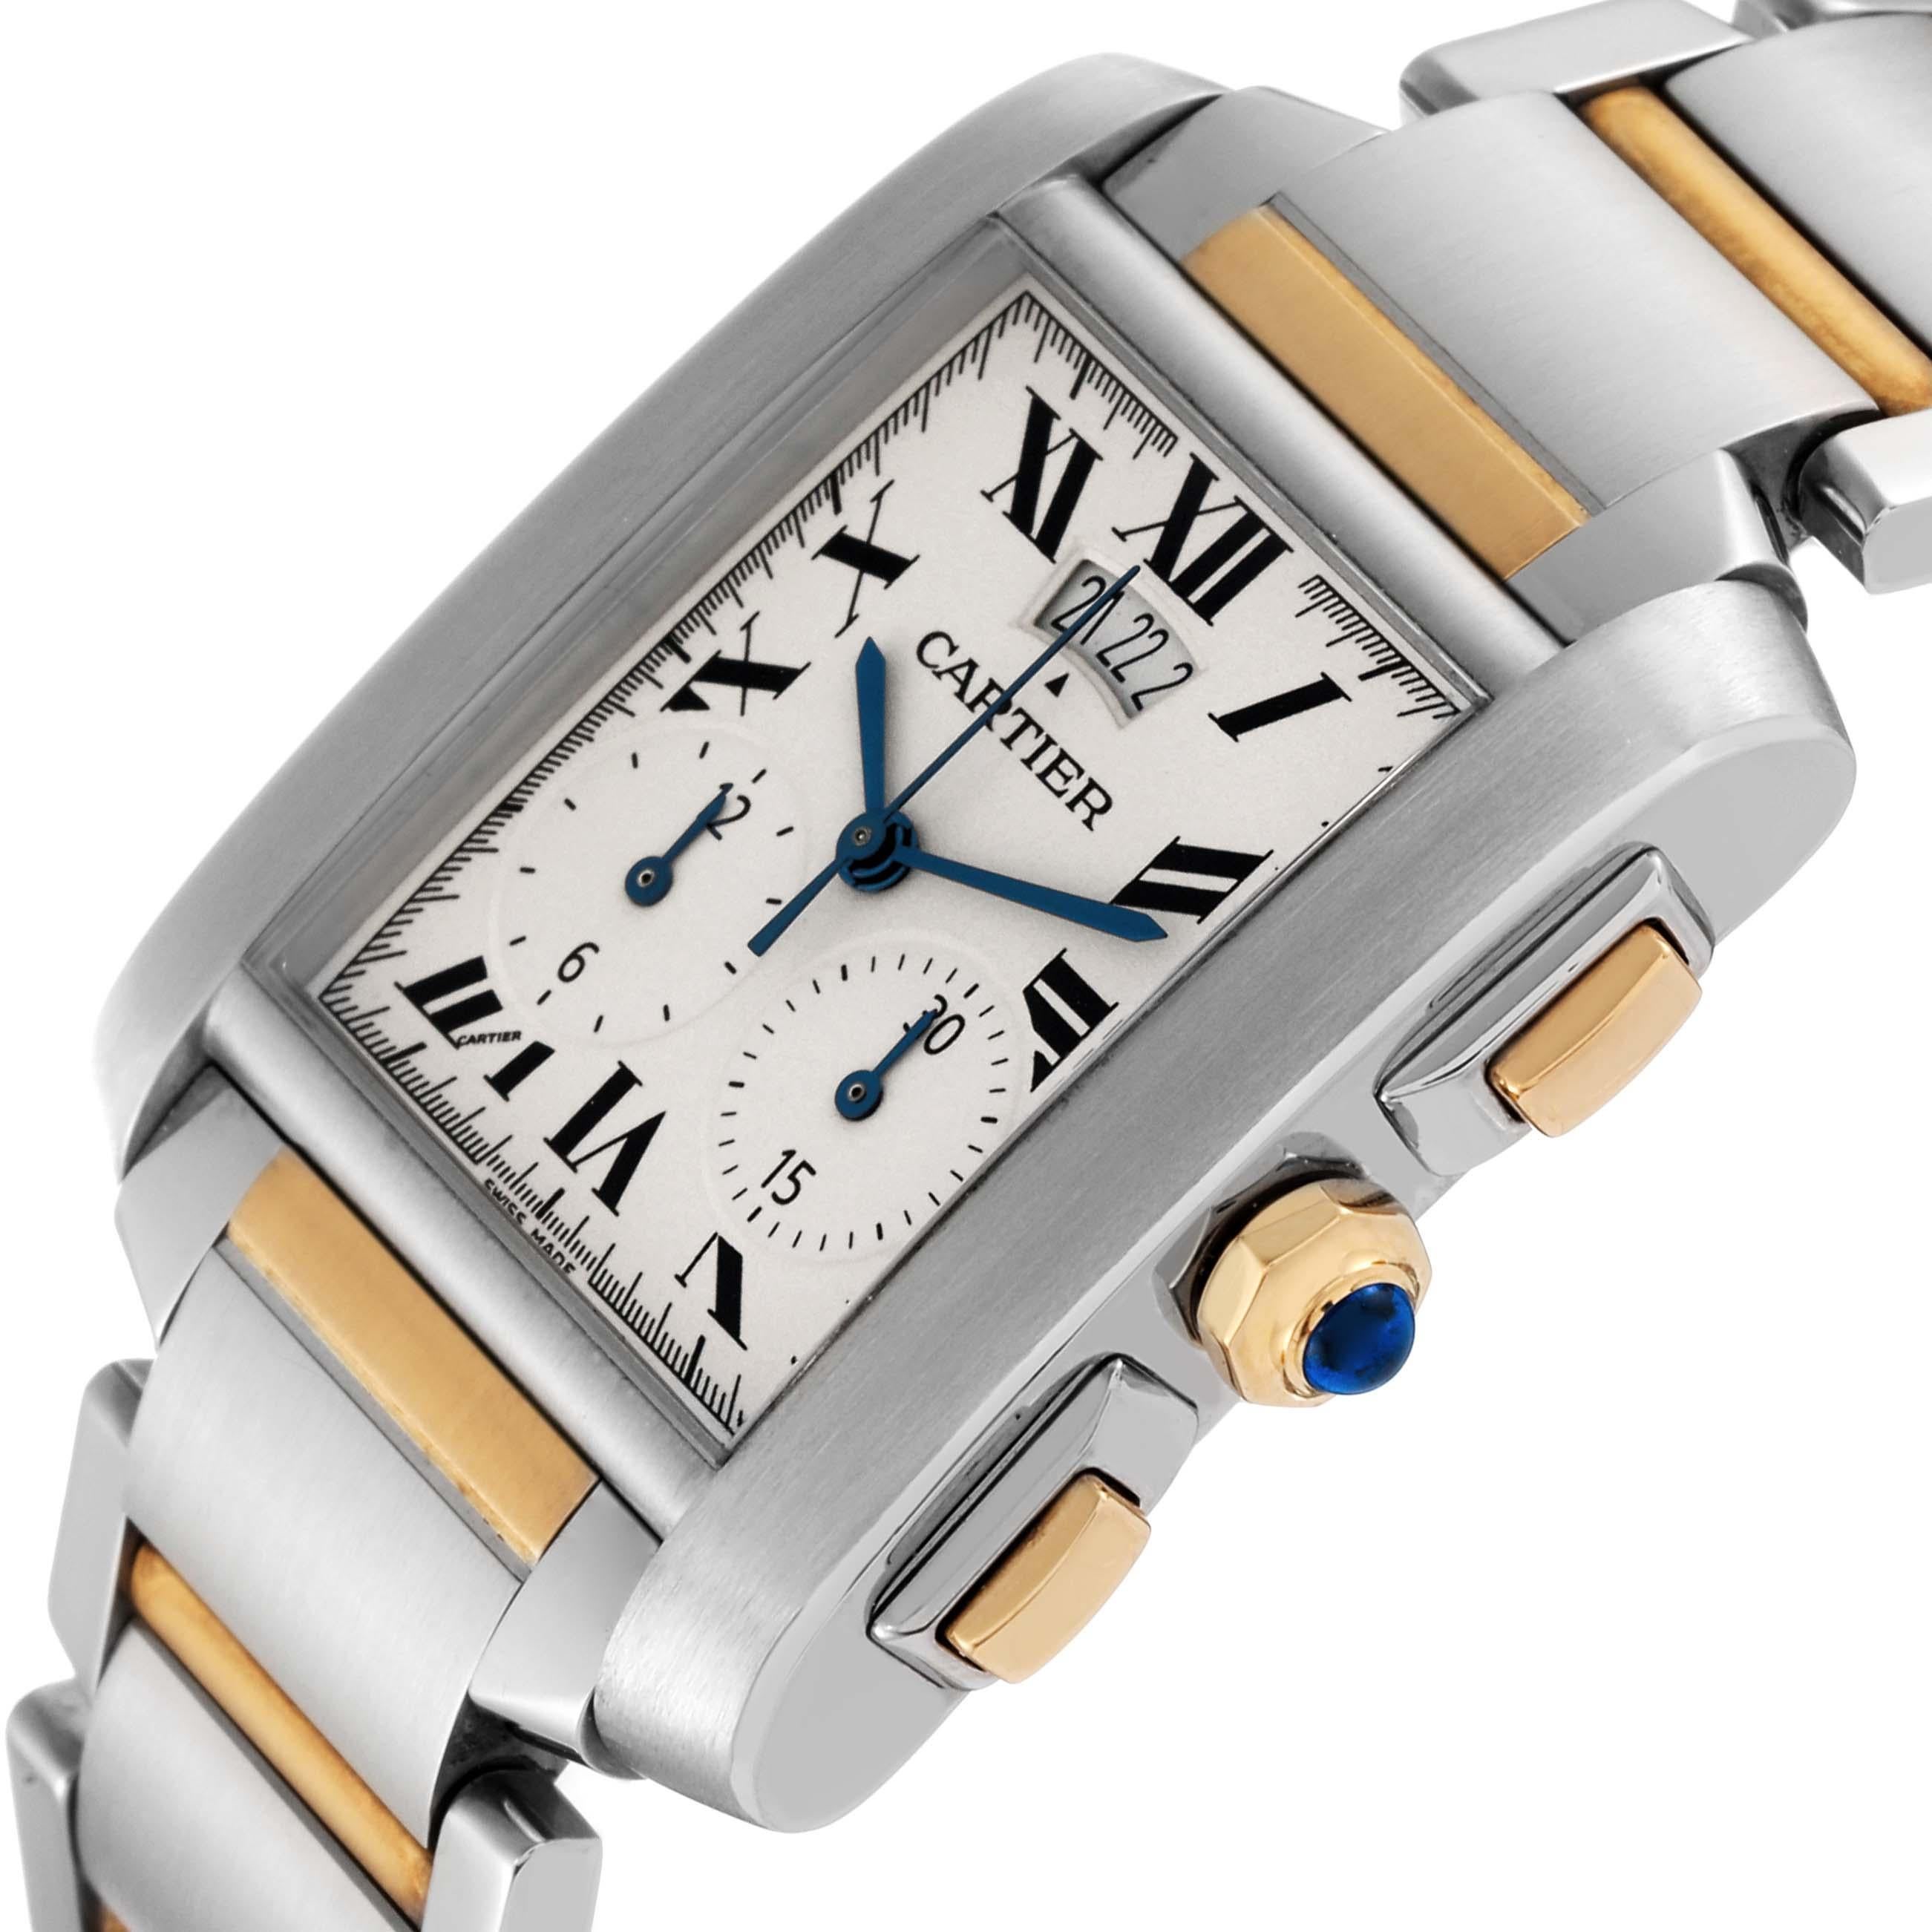 Cartier Tank Francaise Steel Yellow Gold Chronograph Mens Watch W51025Q4. Quartz movement. Rectangular stainless steel and 18K yellow gold 29.0 x 36.0 mm case. Octagonal crown set with a blue spinel cabochon. . Scratch resistant sapphire crystal.